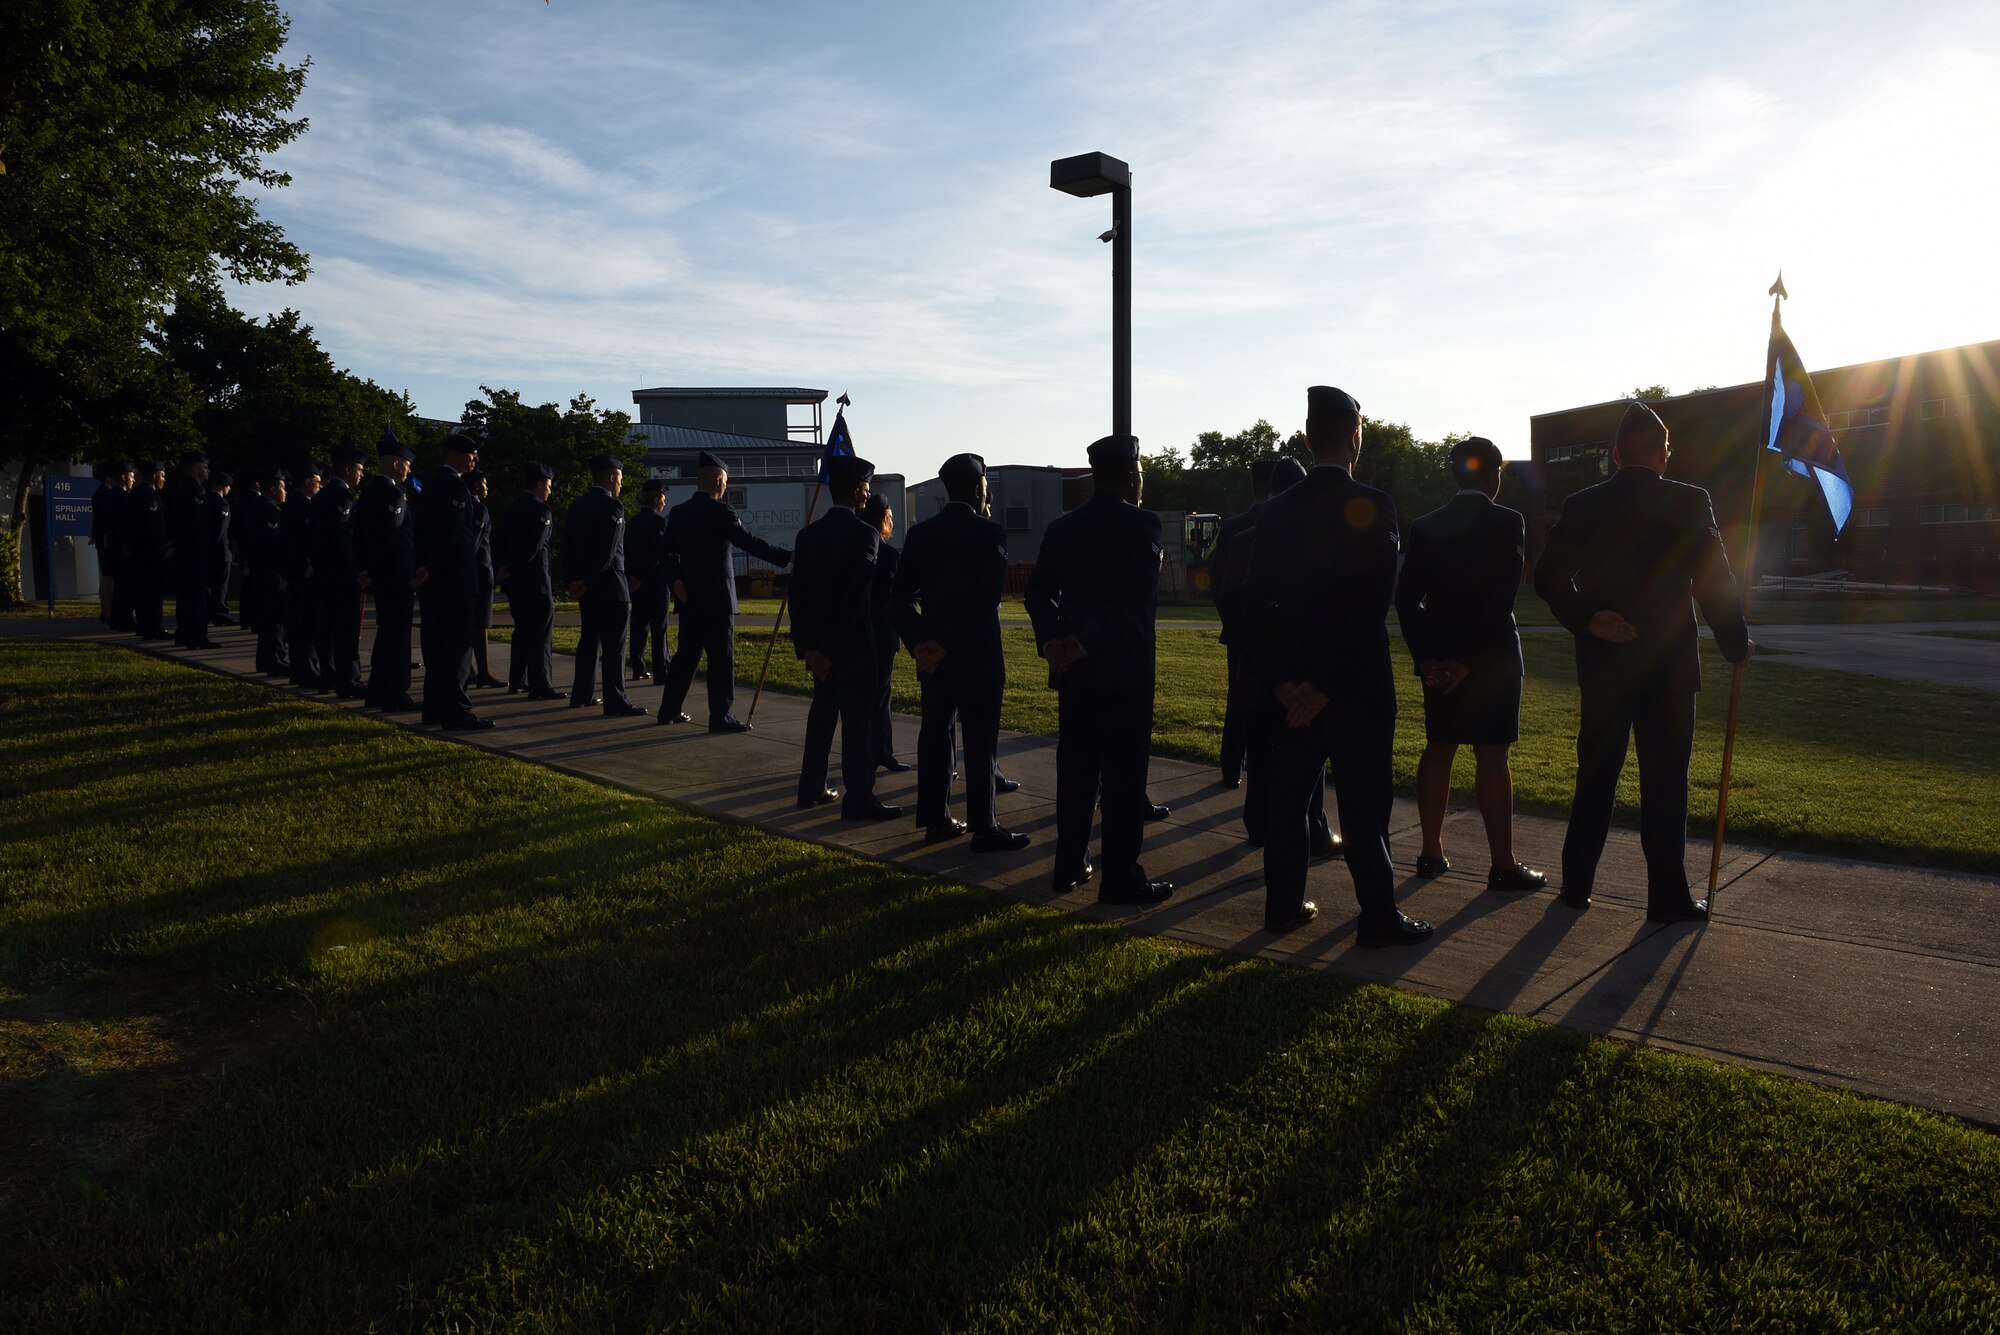 Airmen hold reveille in the sunrise during Airman leadership school at the Chief Master Sergeant Paul H. Lankford Enlisted Professional Military Education Center, June 16, 2016, on McGhee Tyson Air National Guard Base in Louisville, Tenn. (U.S. Air National Guard photo by Master Sgt. Mike R. Smith/Released)